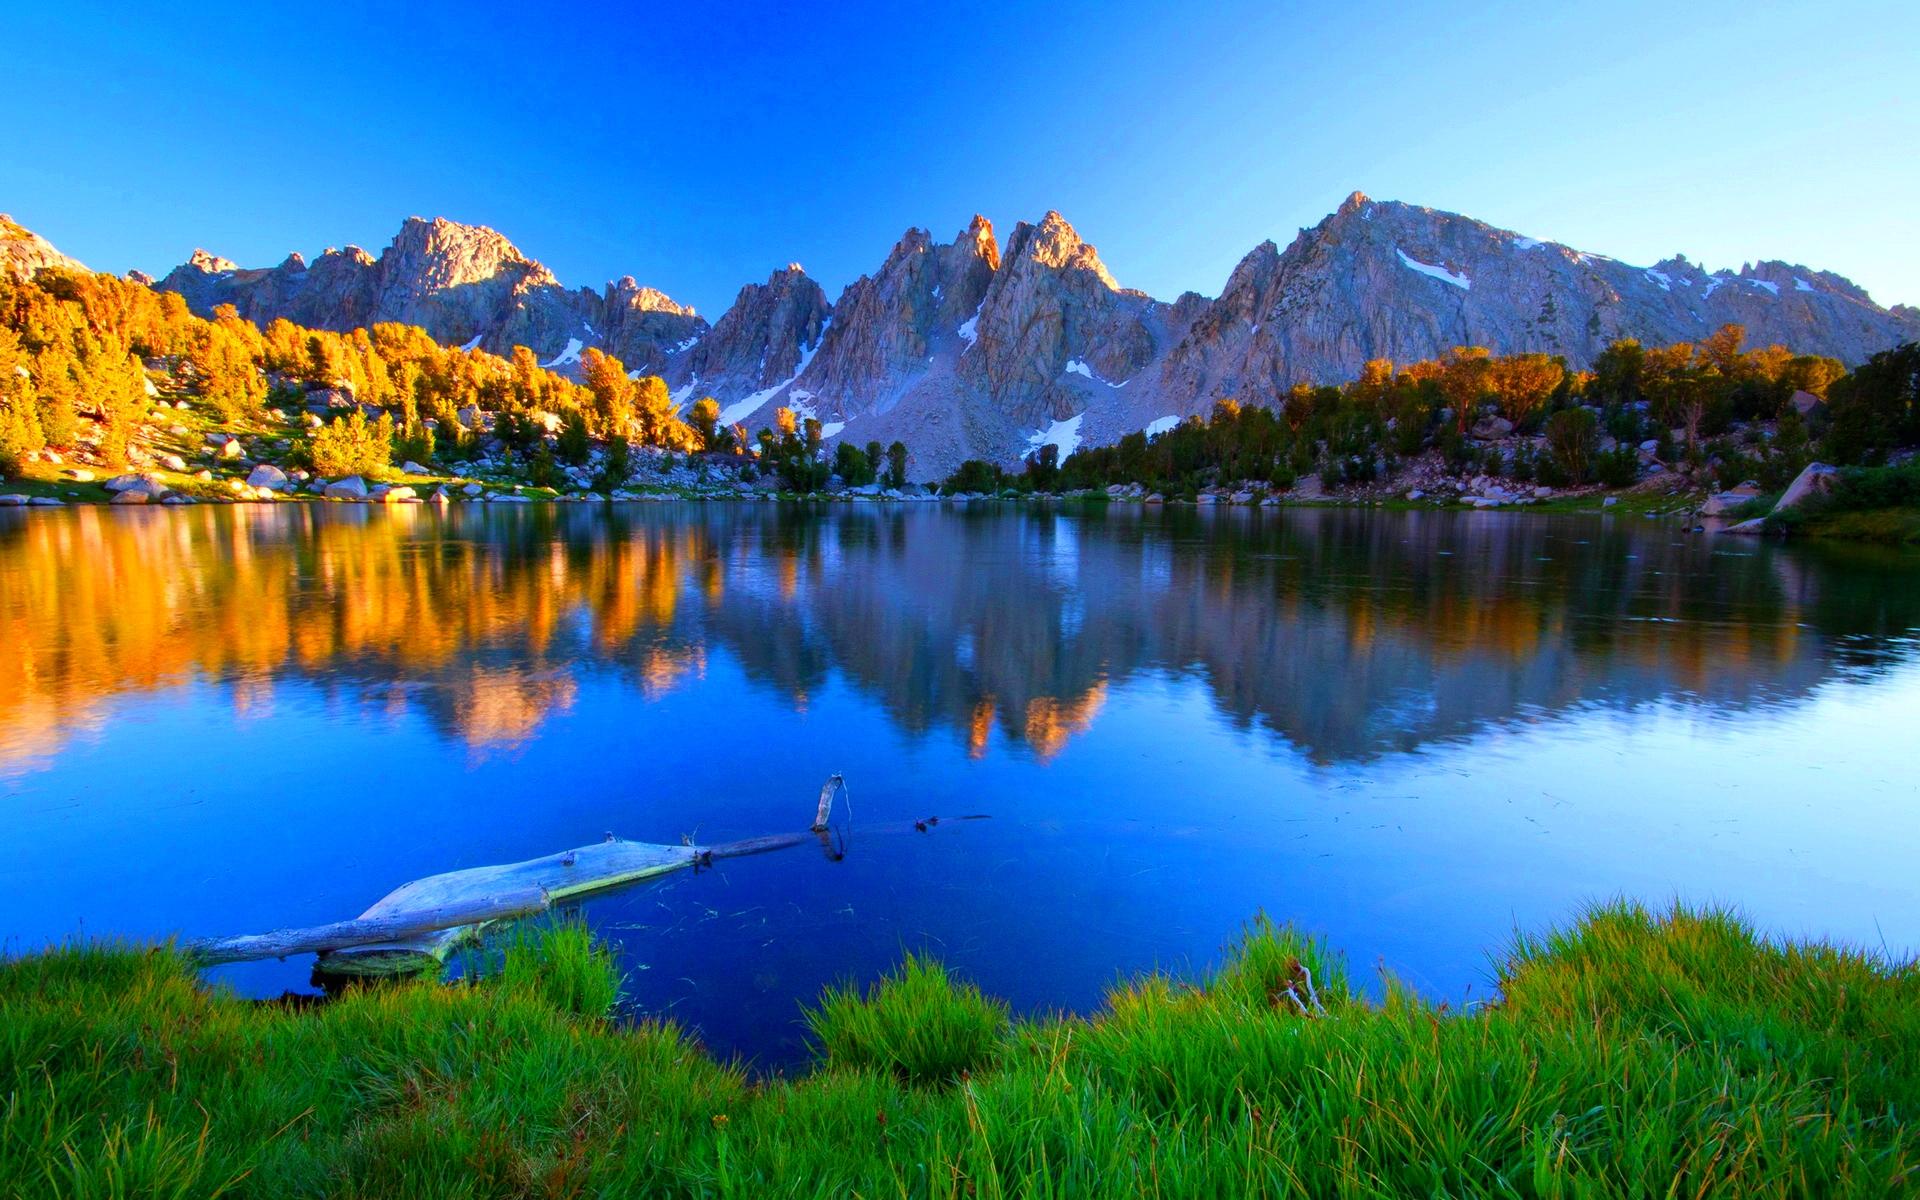 Download wallpaper 1440x900 lake, mountains, forest 